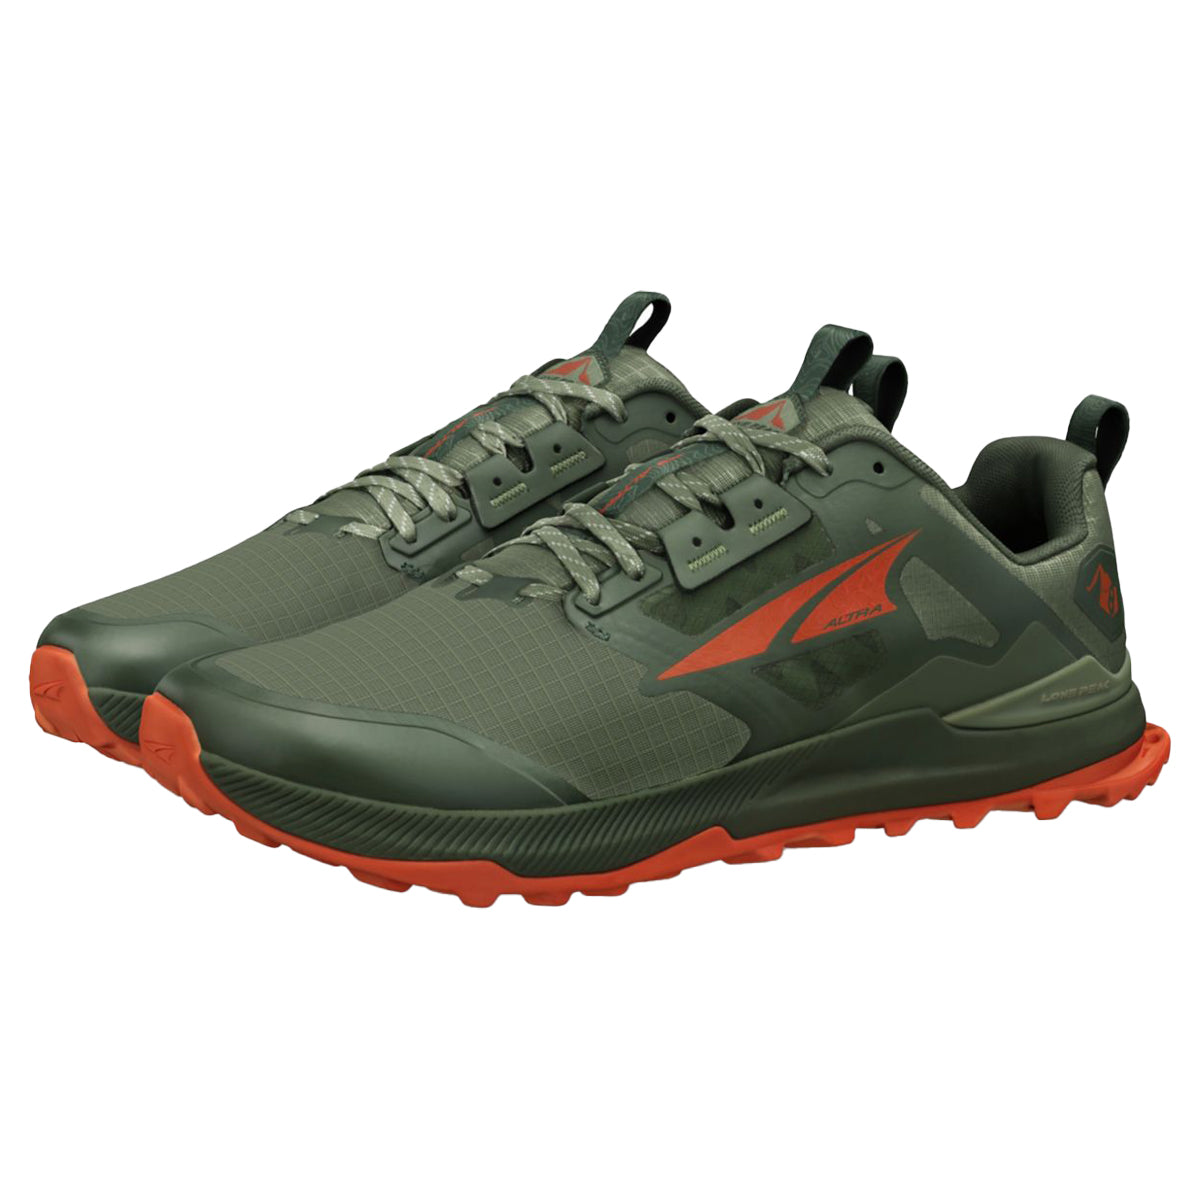 Altra Lone Peak 8 in Dusty Olive by GOHUNT | Altra - GOHUNT Shop